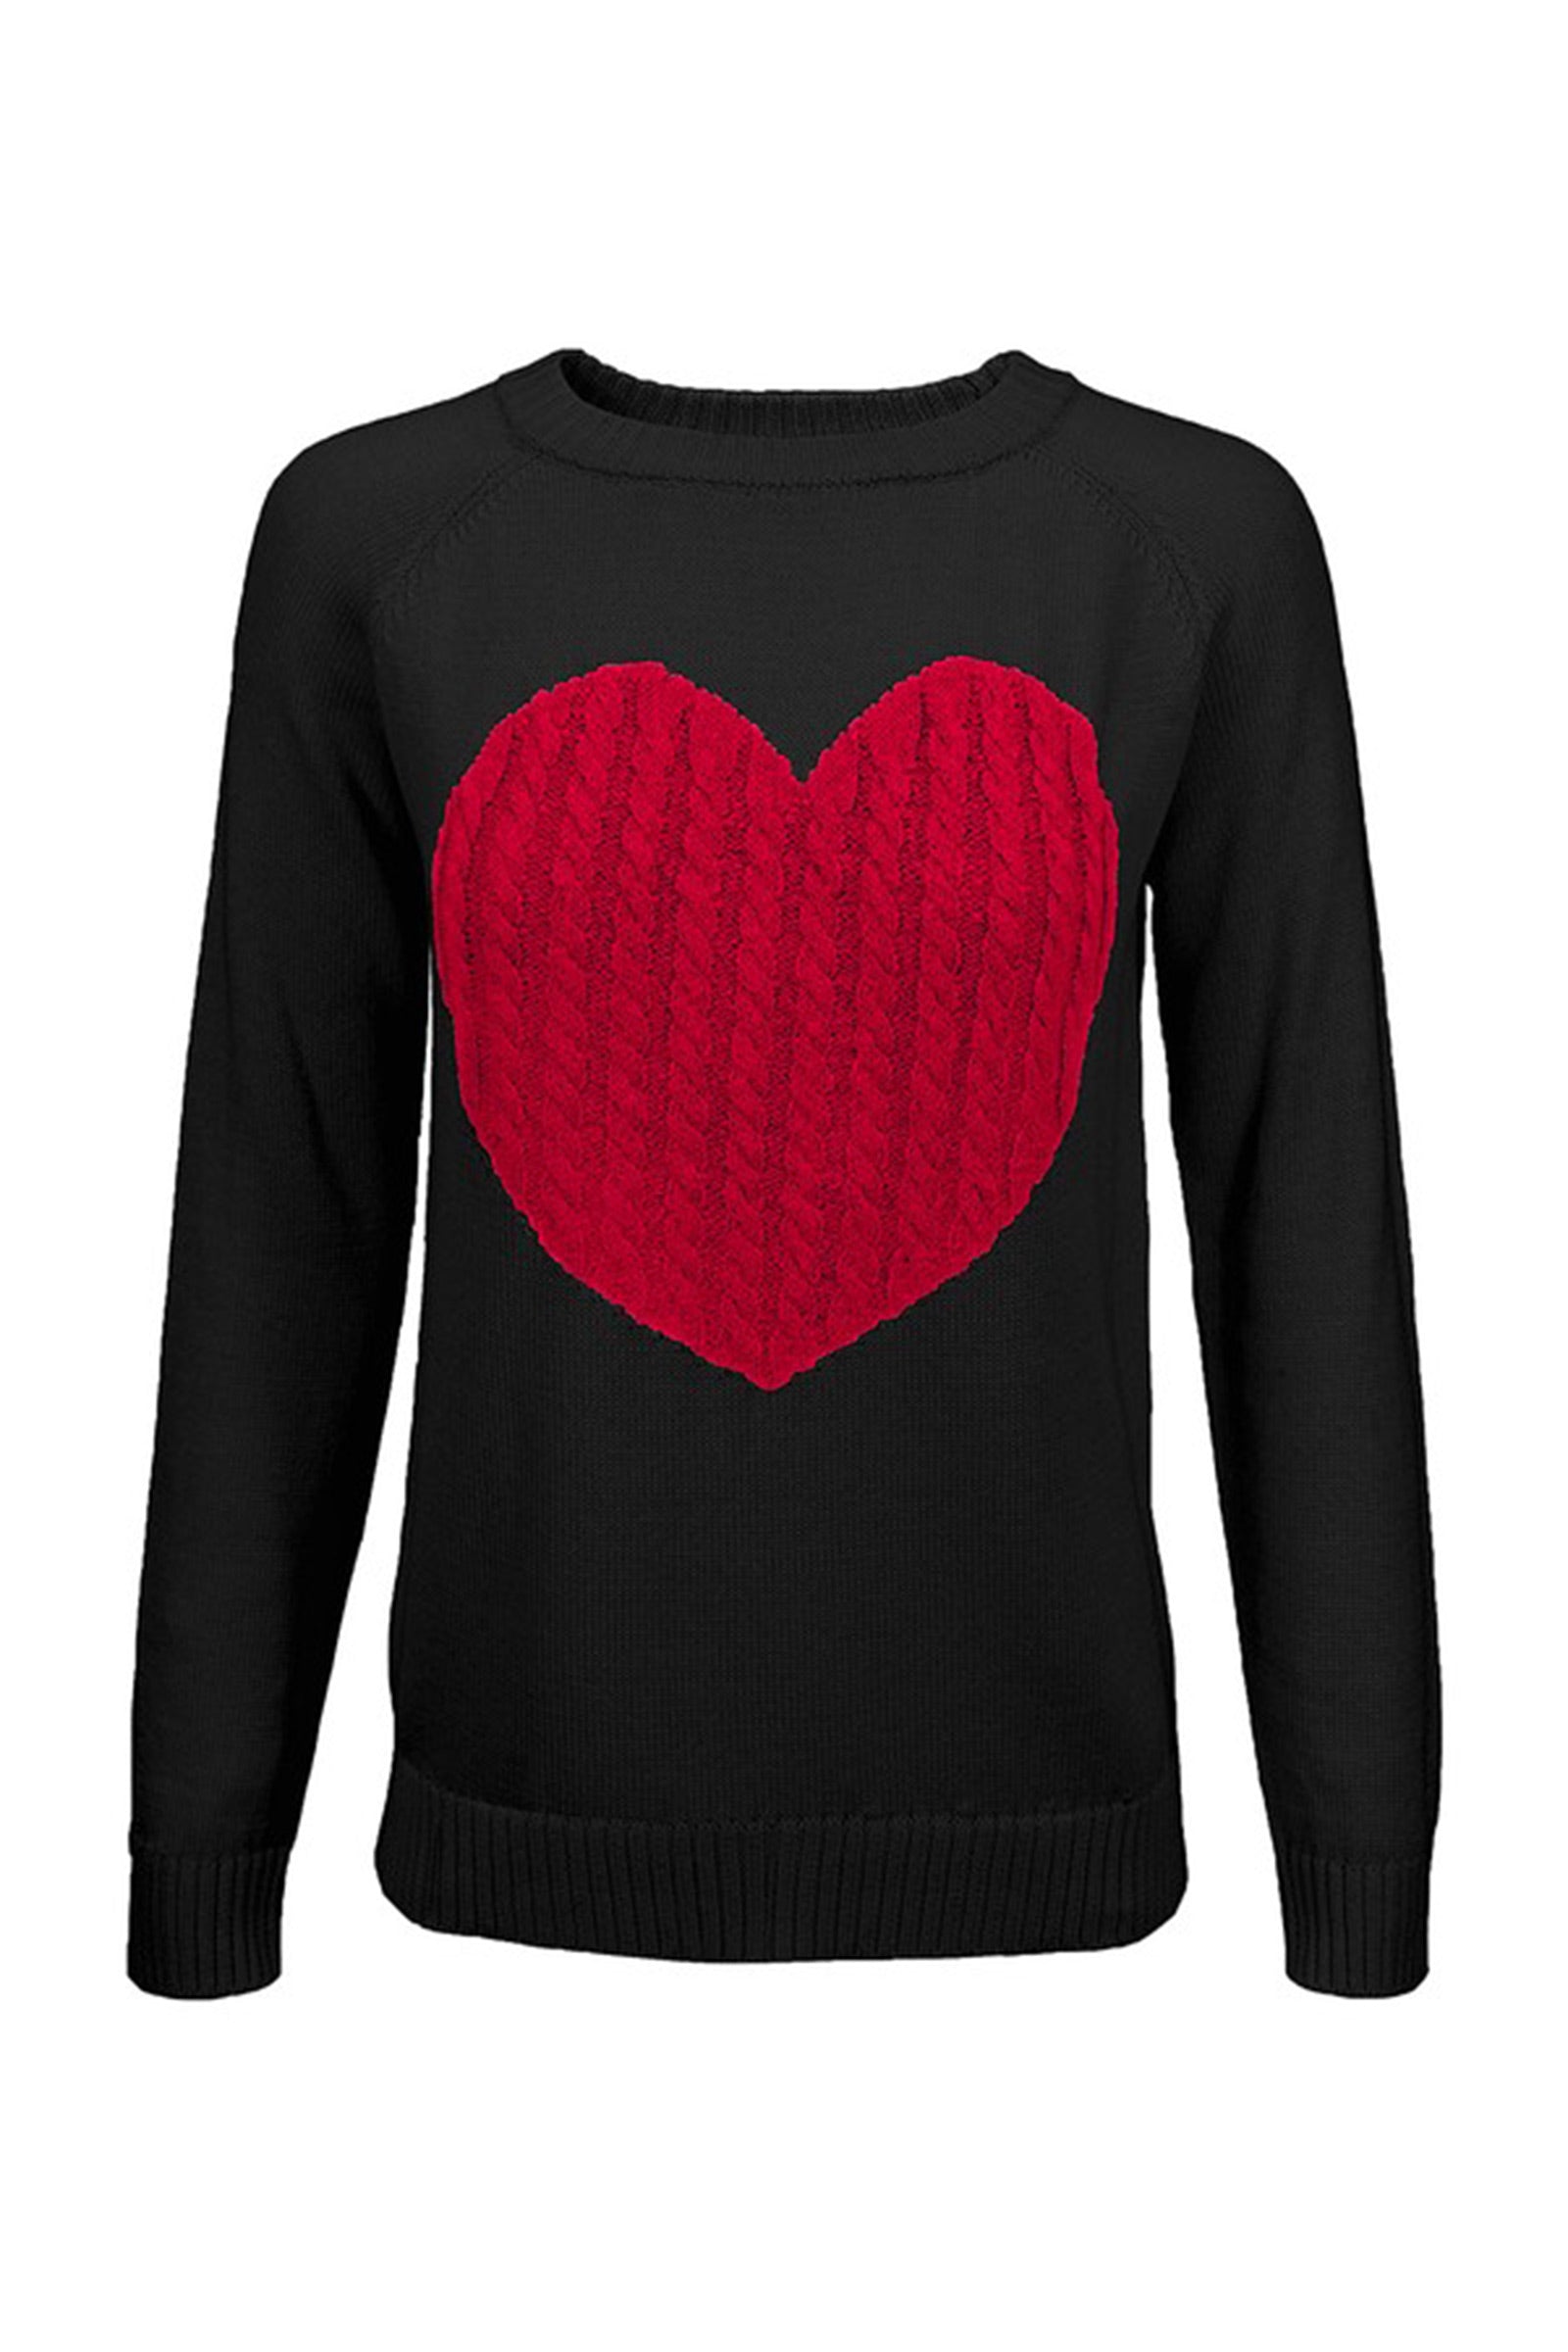 Follow Your Heart Sweaters - Closet Candy Boutique